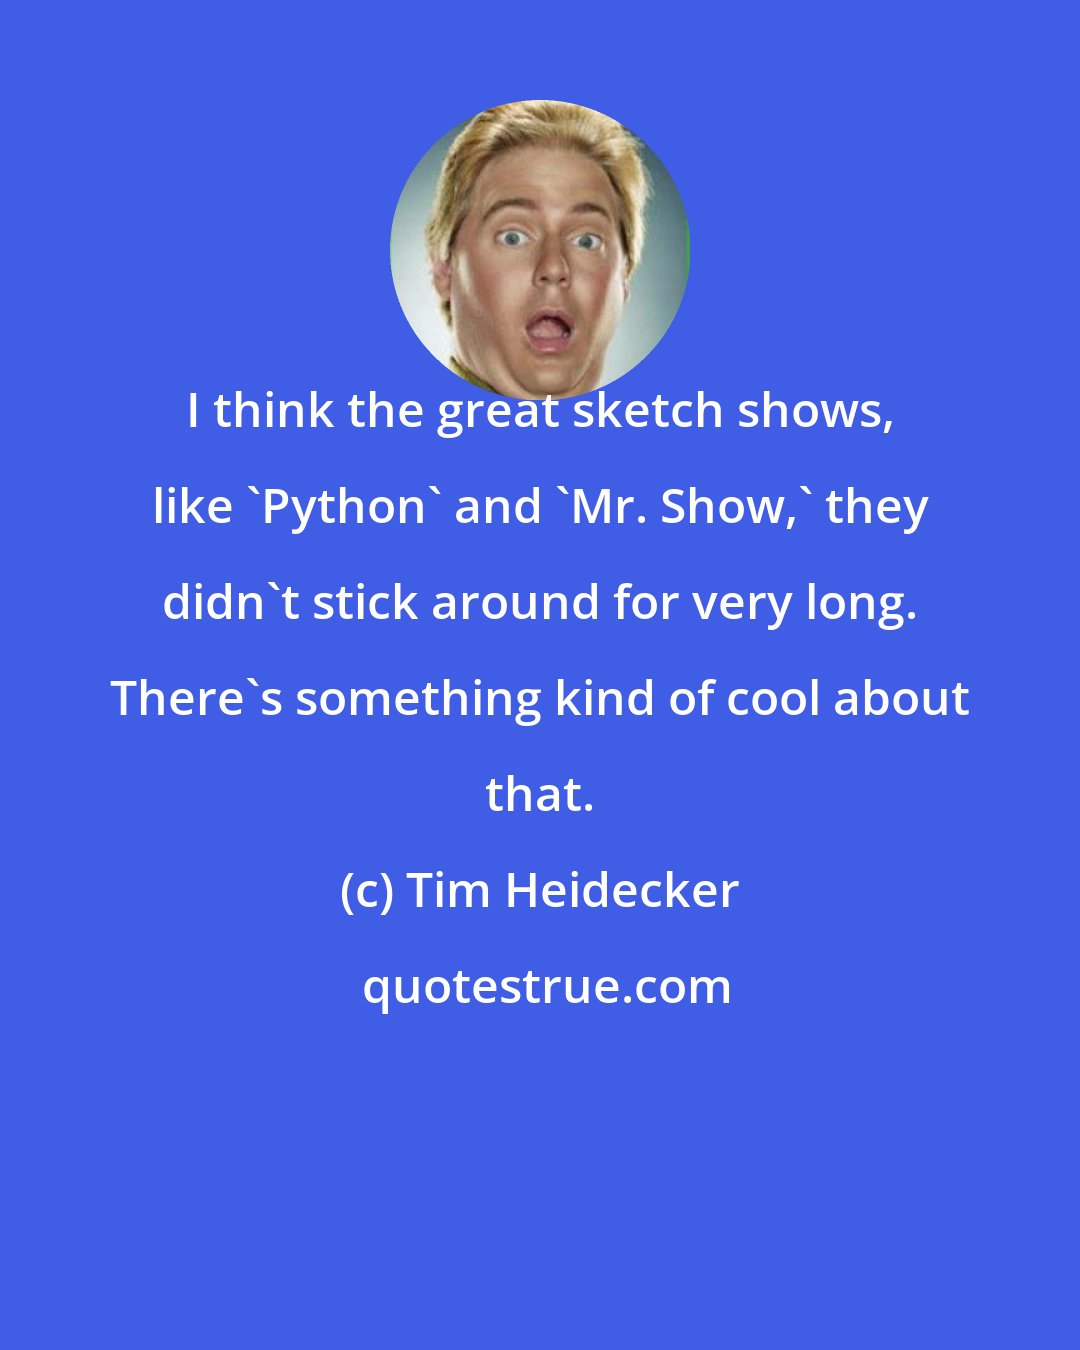 Tim Heidecker: I think the great sketch shows, like 'Python' and 'Mr. Show,' they didn't stick around for very long. There's something kind of cool about that.